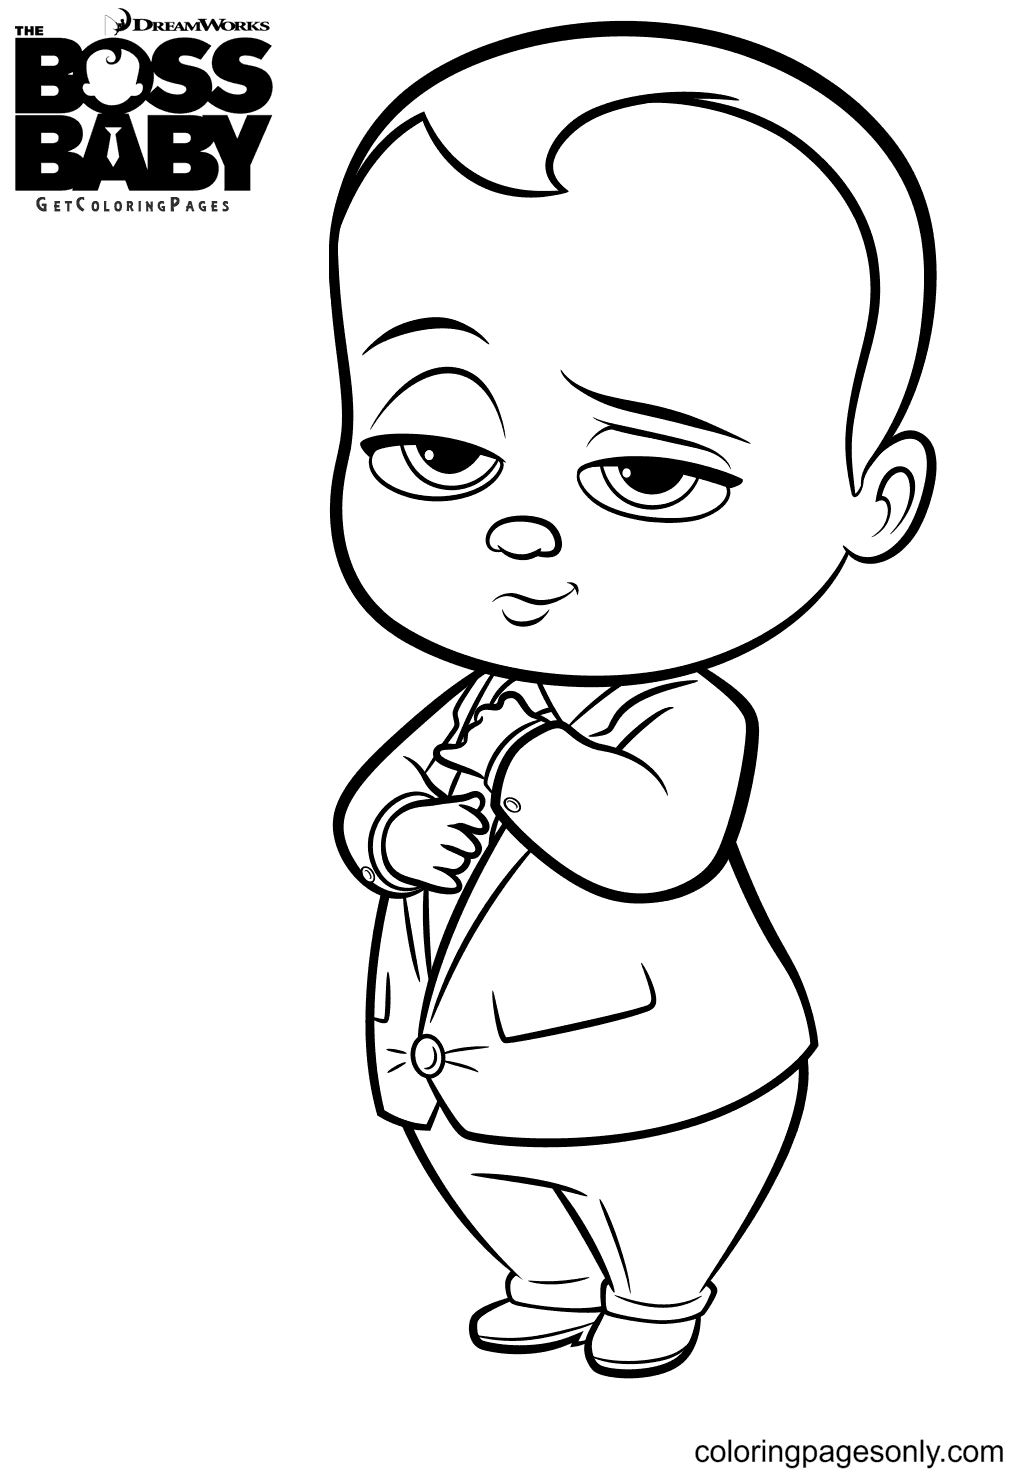 Cute Boss Baby in Suit Coloring Page